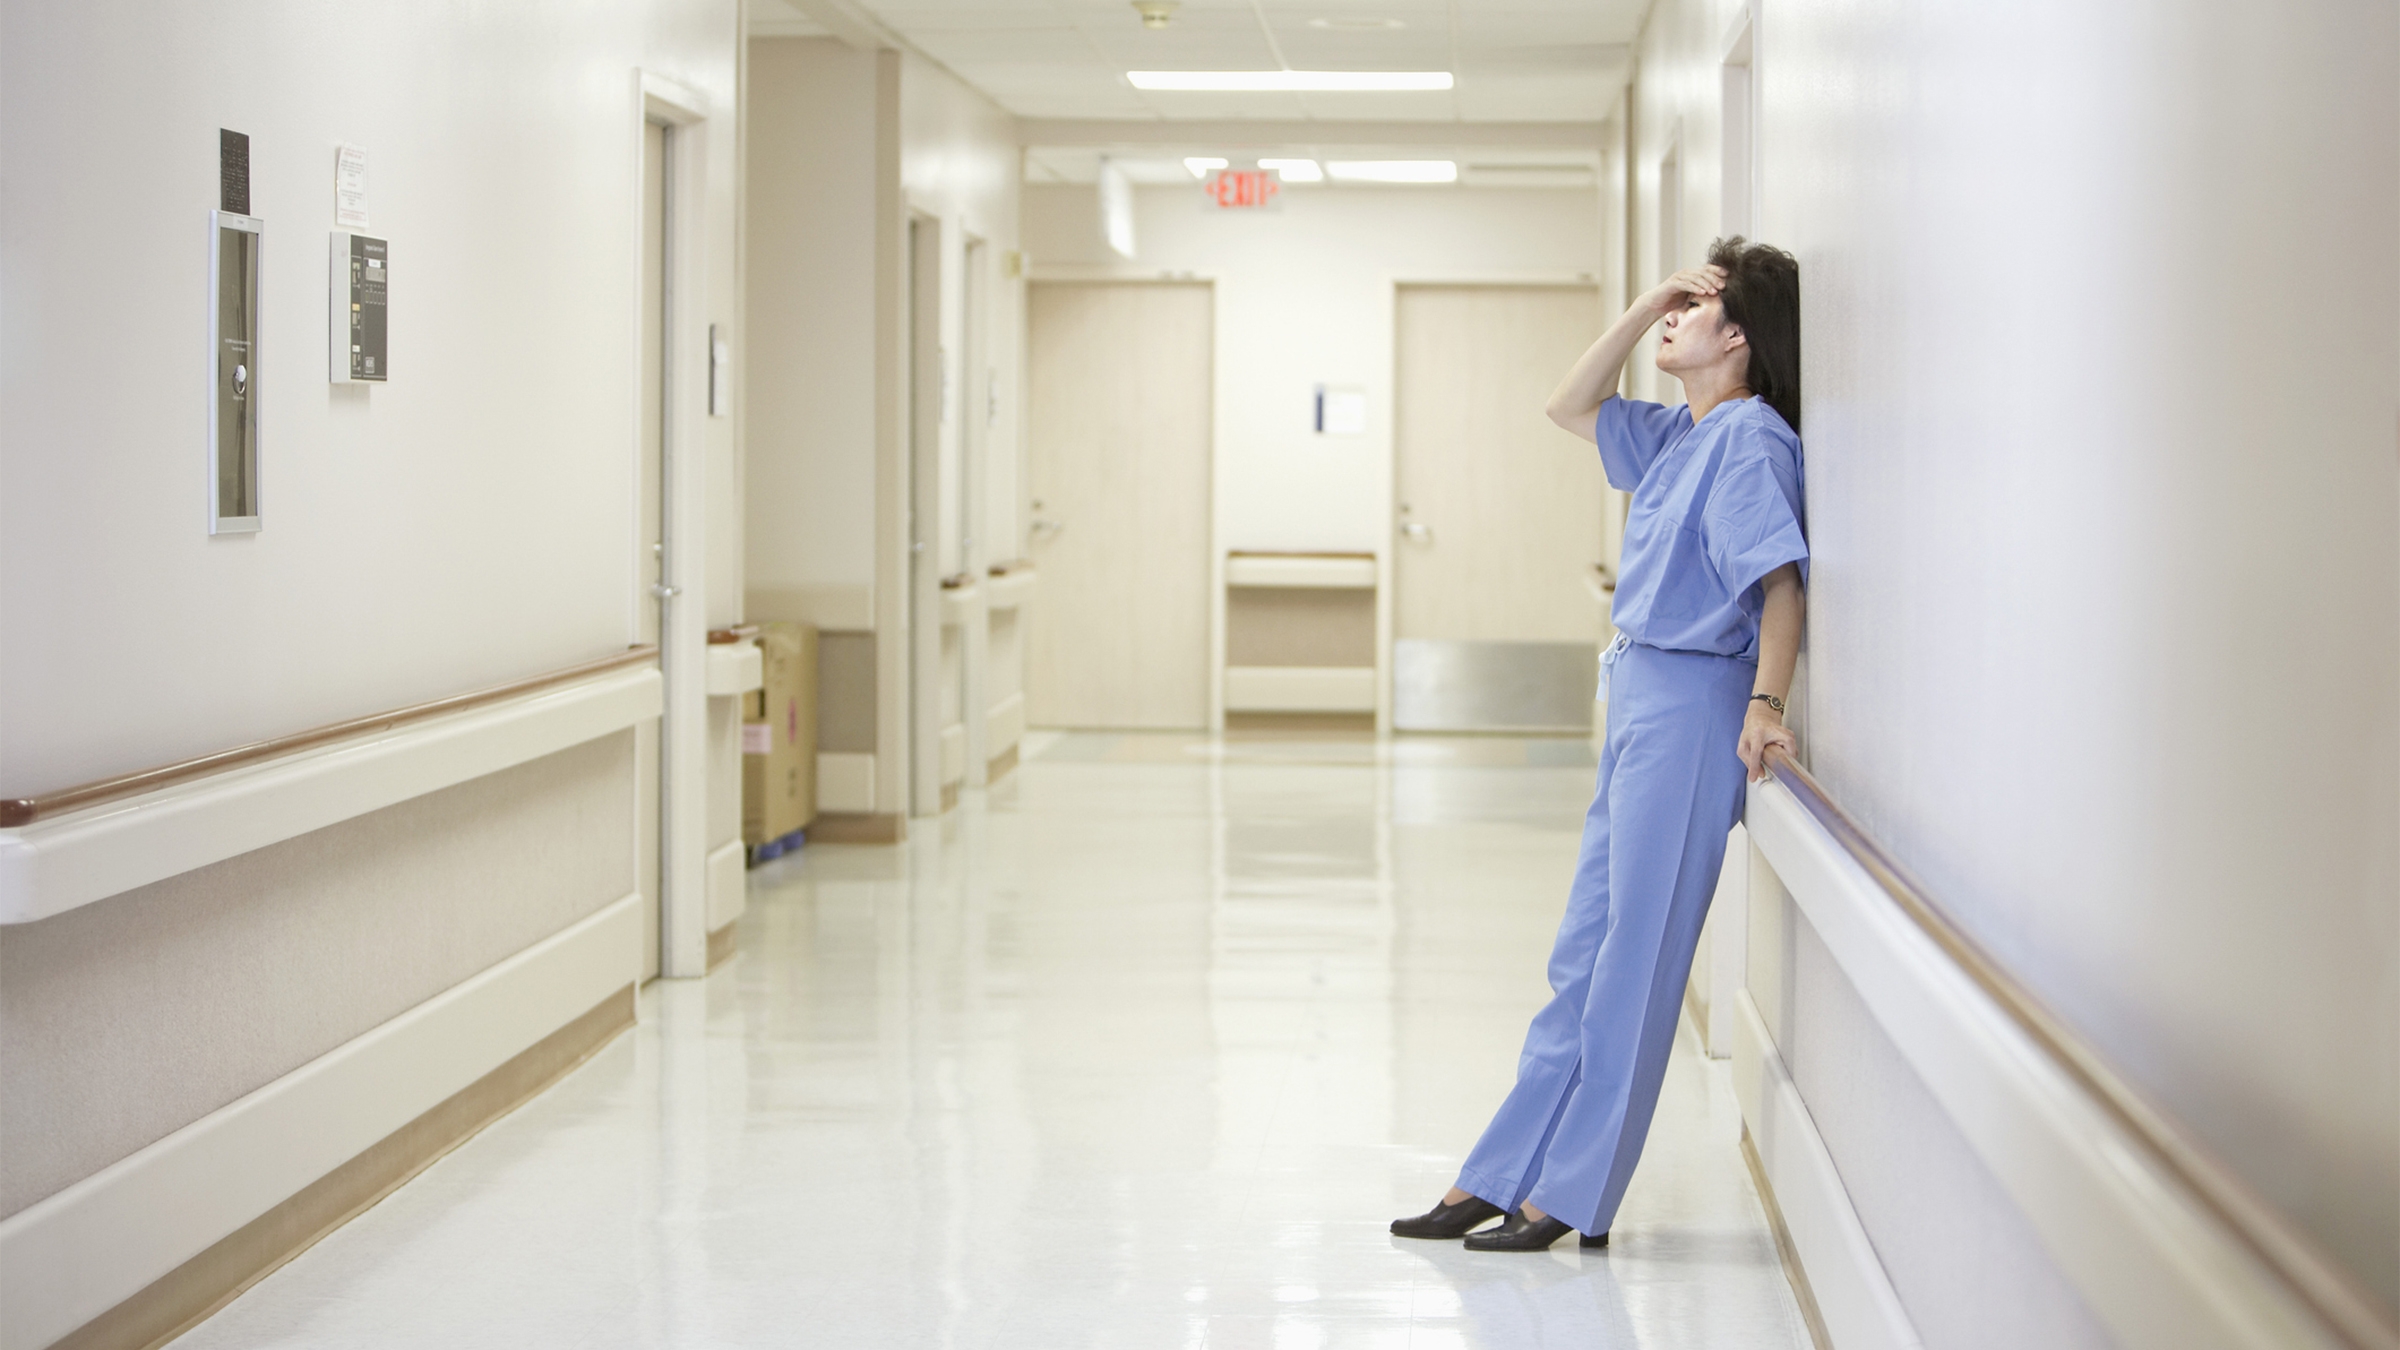 Health care providers are at risk of burnout, especially during the current pandemic.